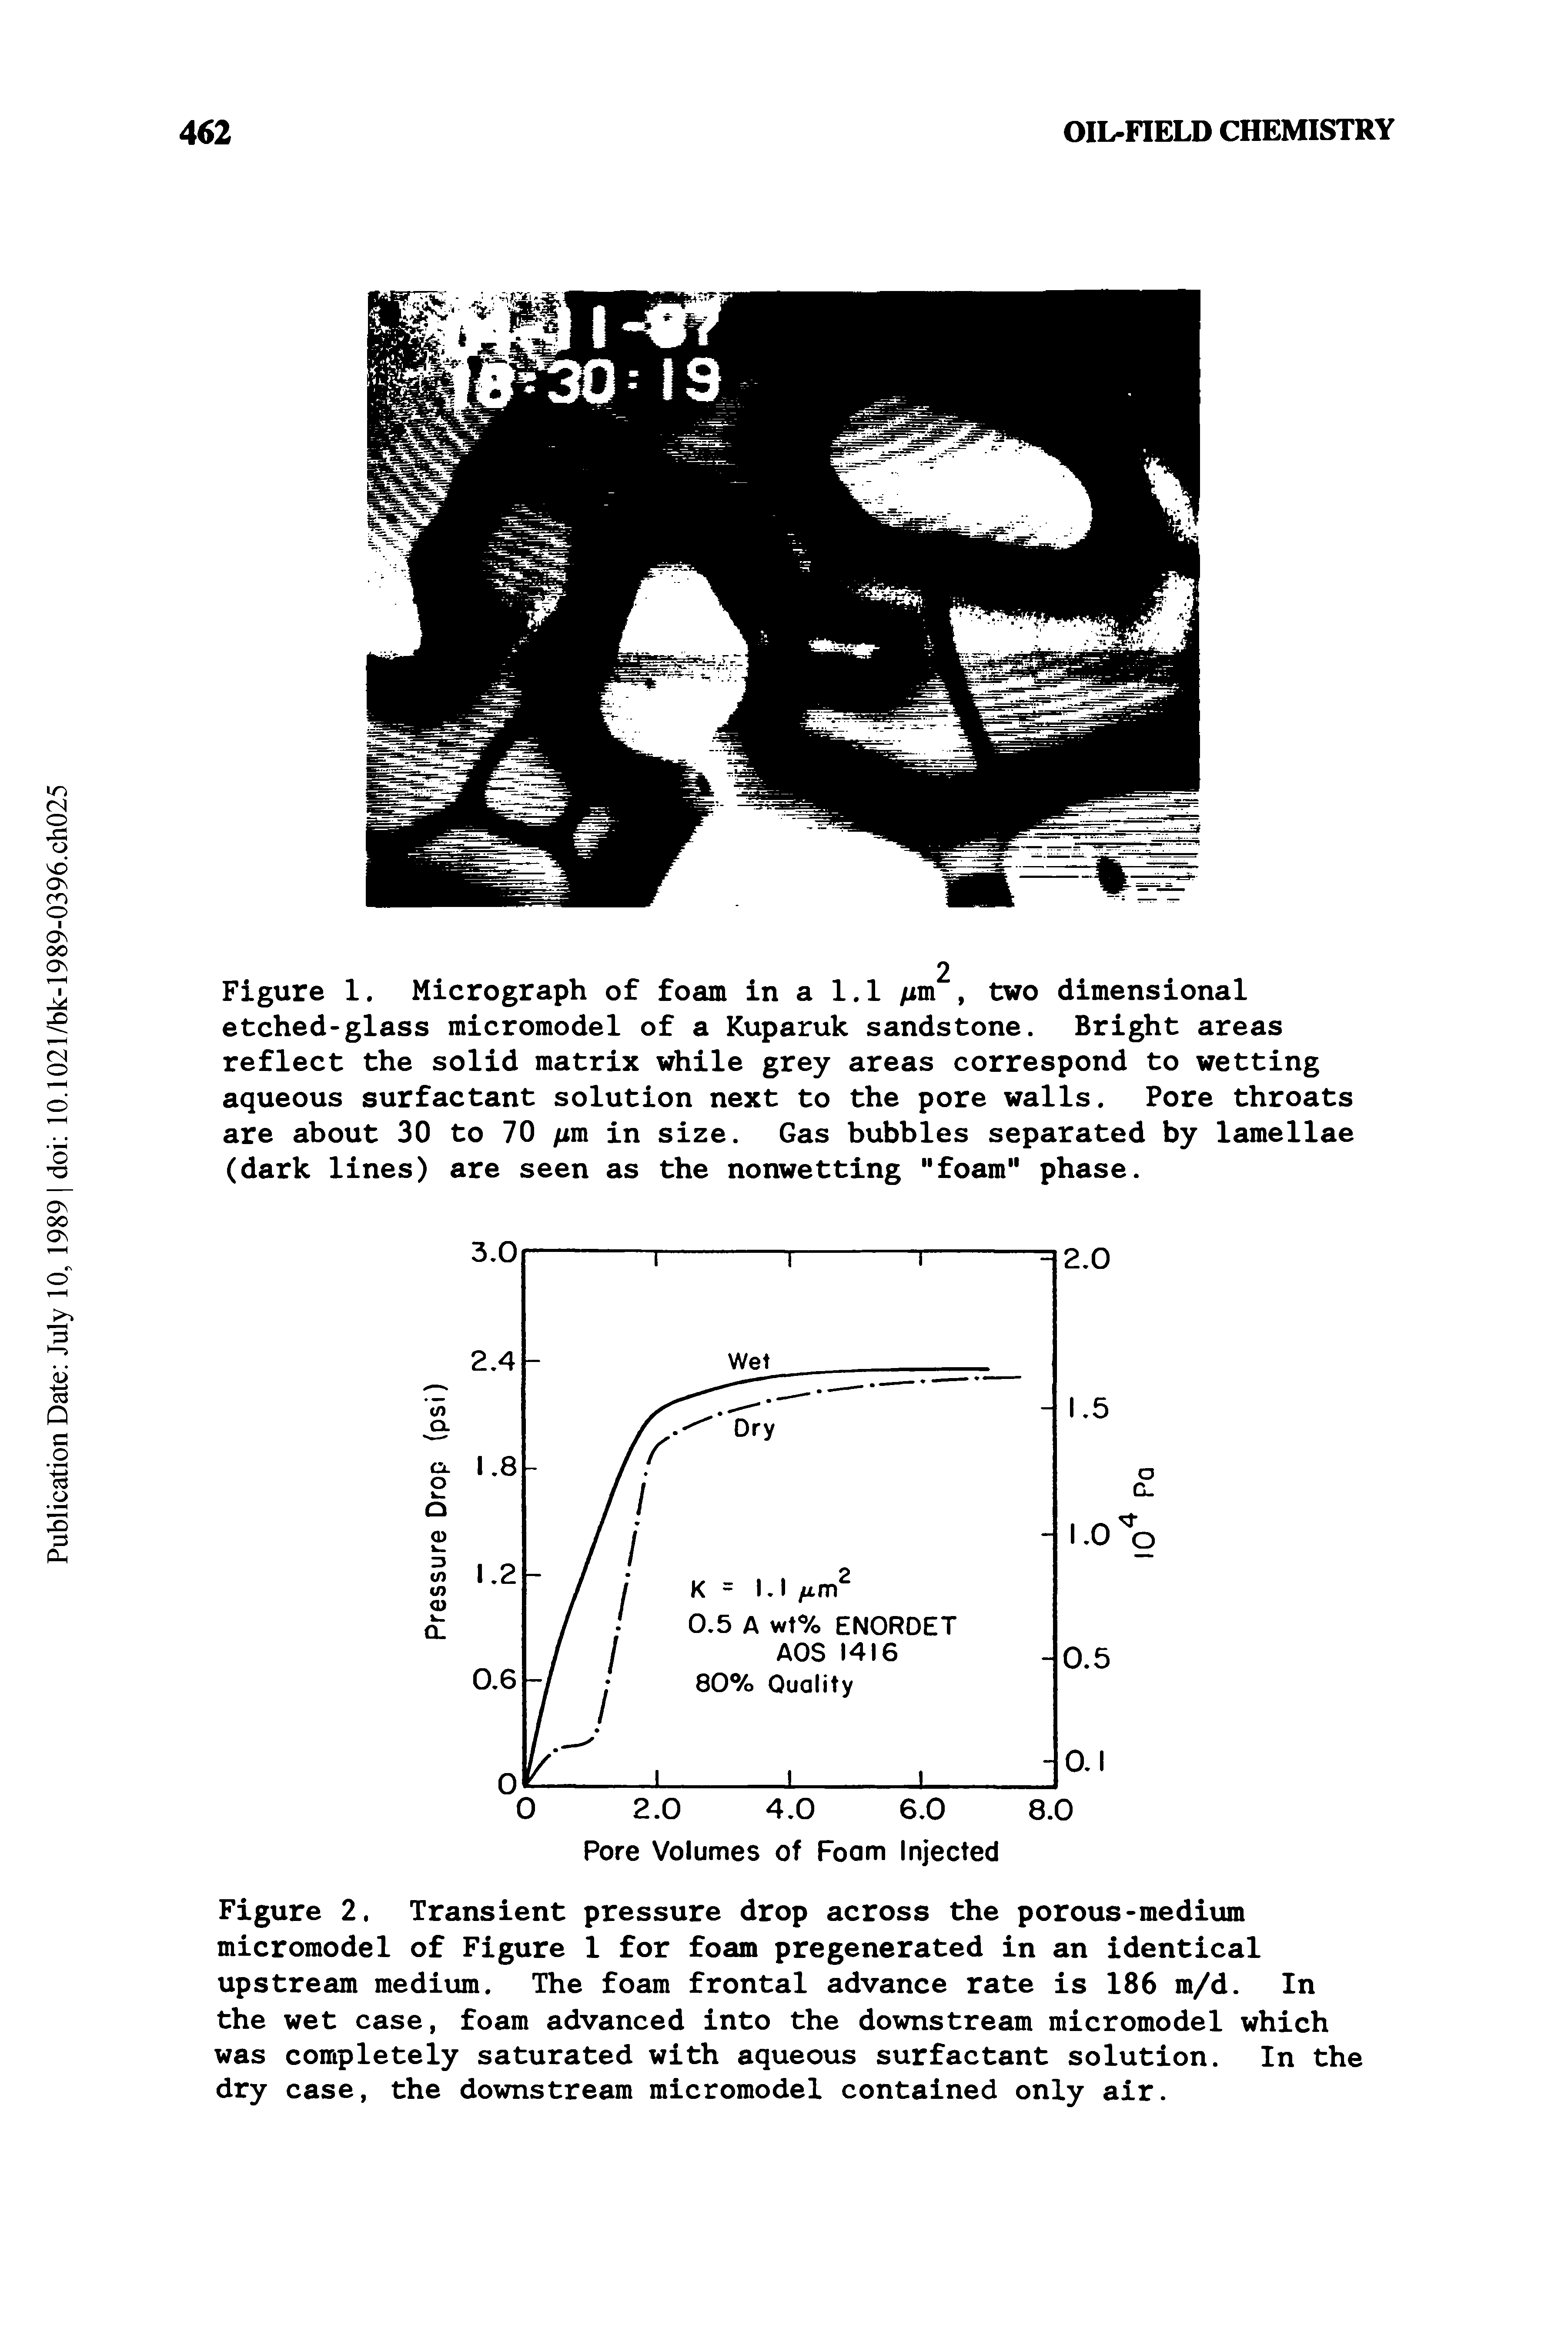 Figure 2. Transient pressure drop across the porous-medium micromodel of Figure 1 for foam pregenerated in an identical upstream medium. The foam frontal advance rate is 186 m/d. In the wet case, foam advanced into the downstream micromodel which was completely saturated with aqueous surfactant solution. In the dry case, the downstream micromodel contained only air.